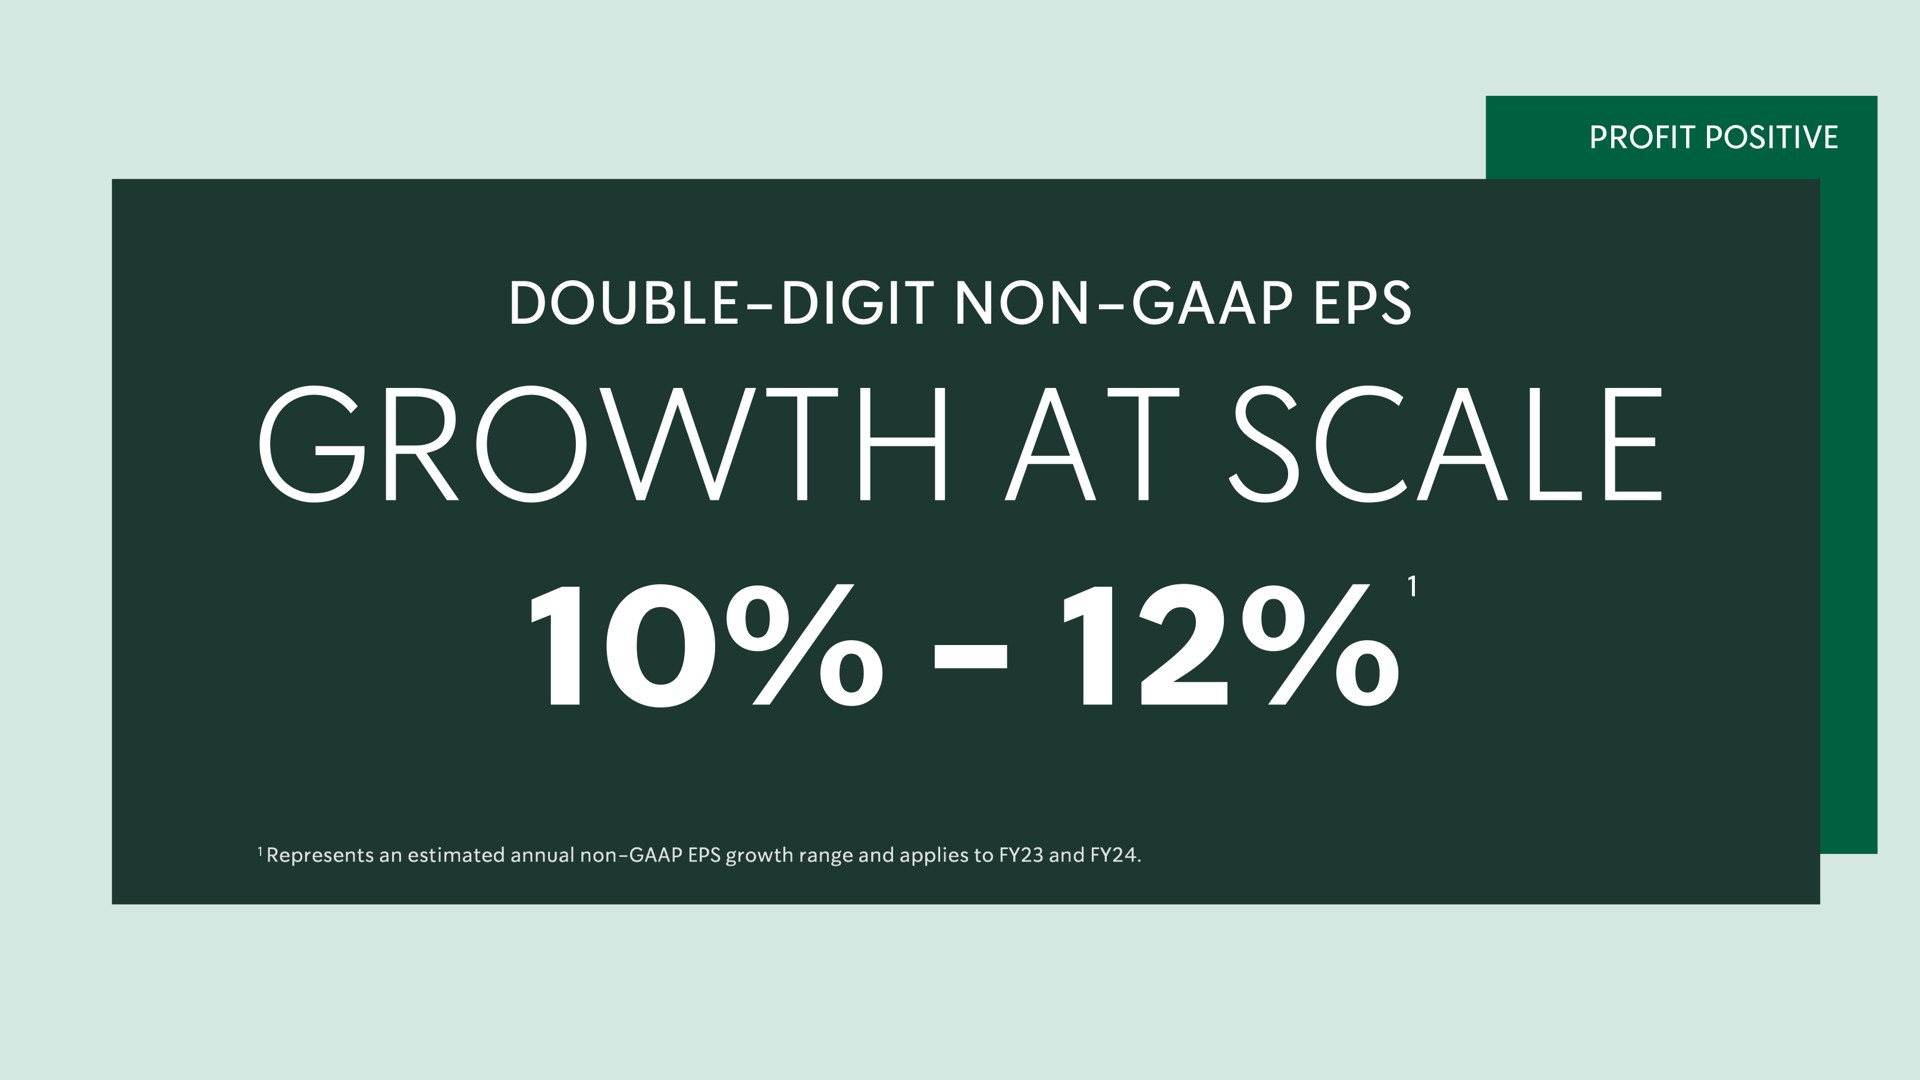 profit positive double digit non growth at scale | Starbucks